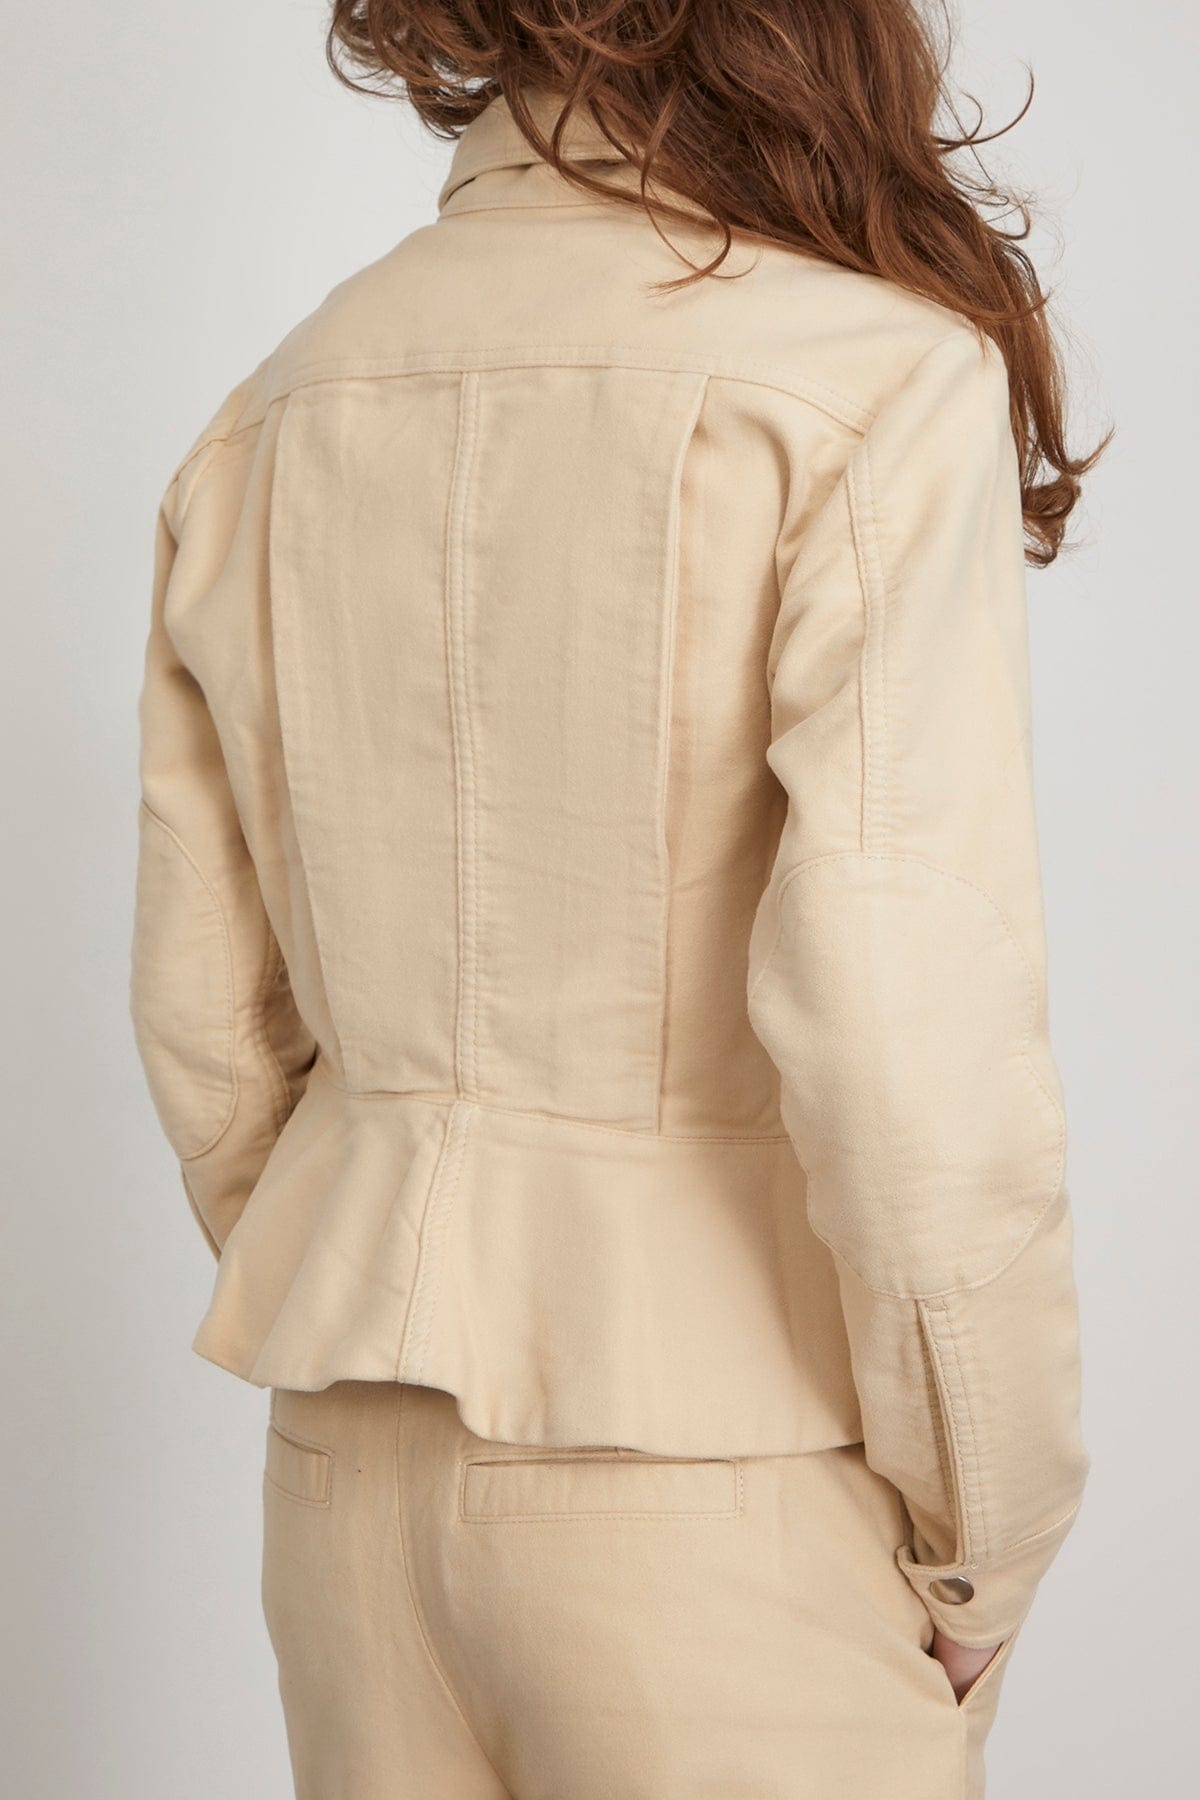 Ava Jacket in Canvas - 4